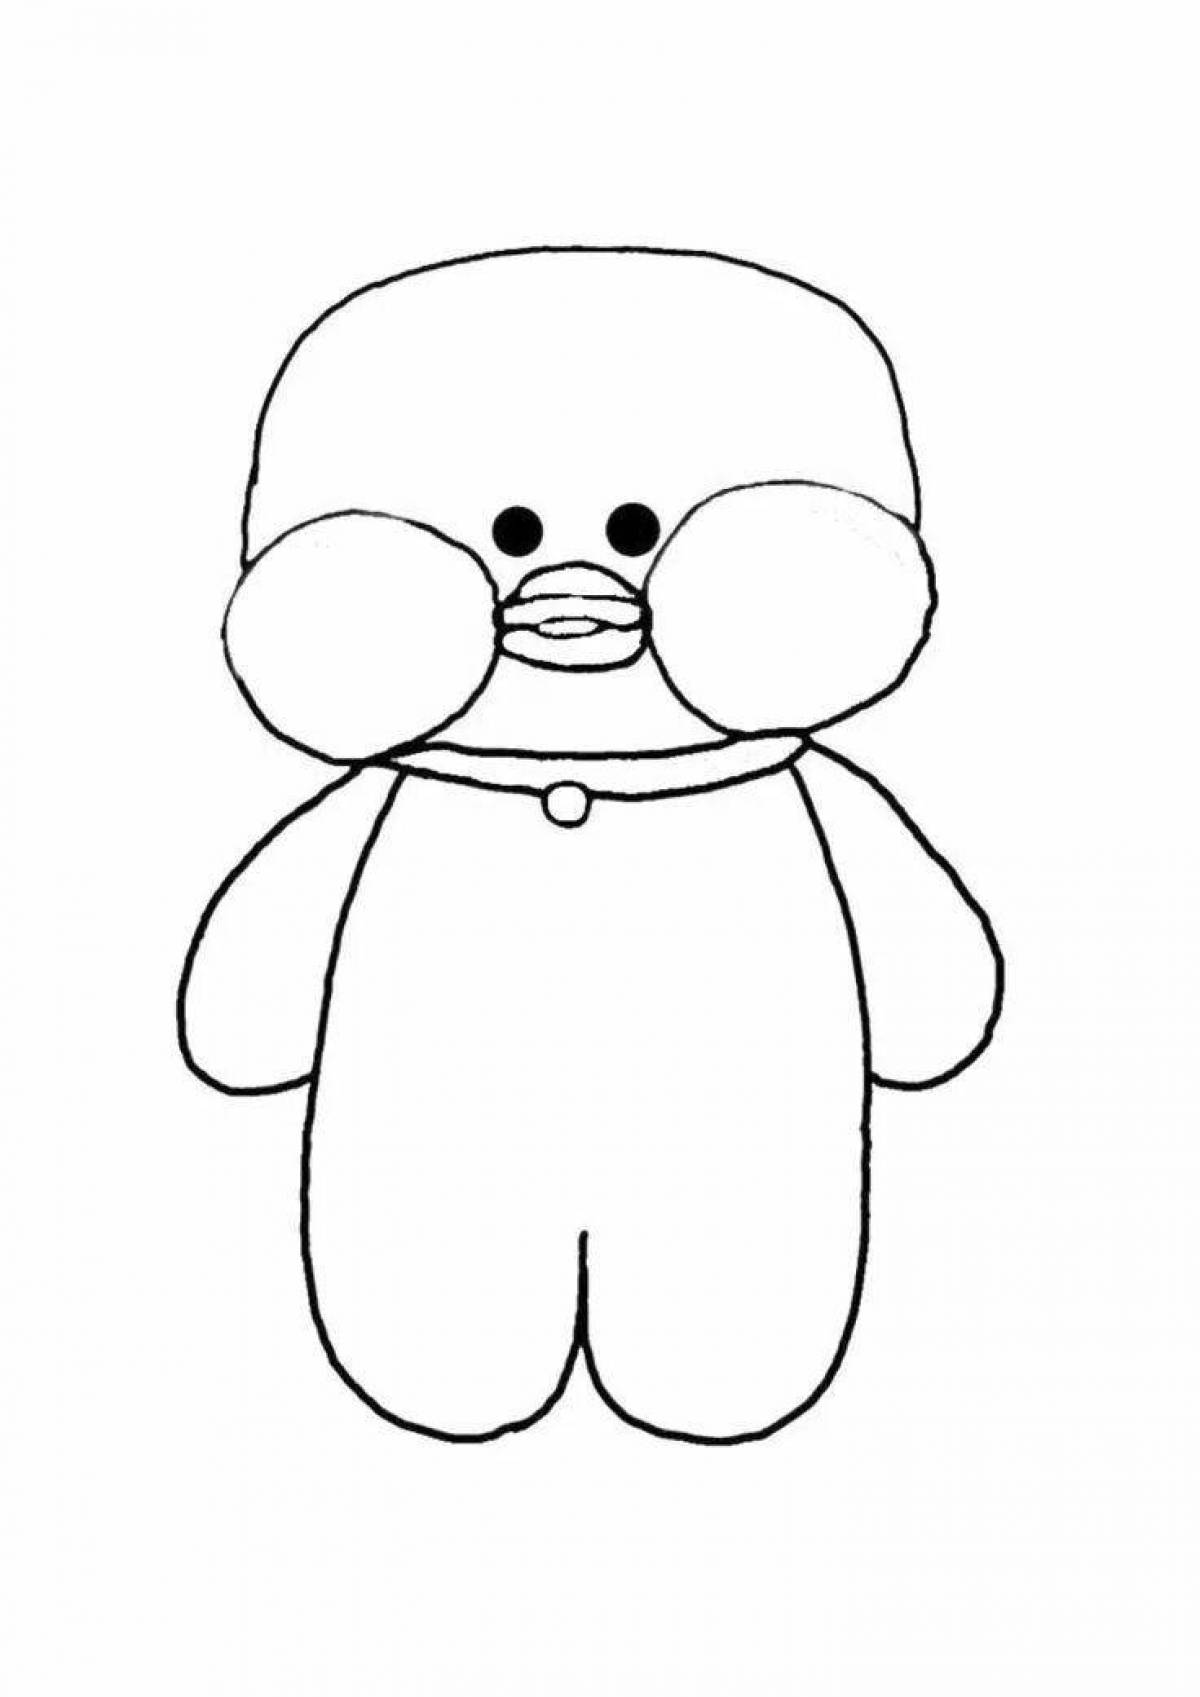 Animated lolofan duck coloring page